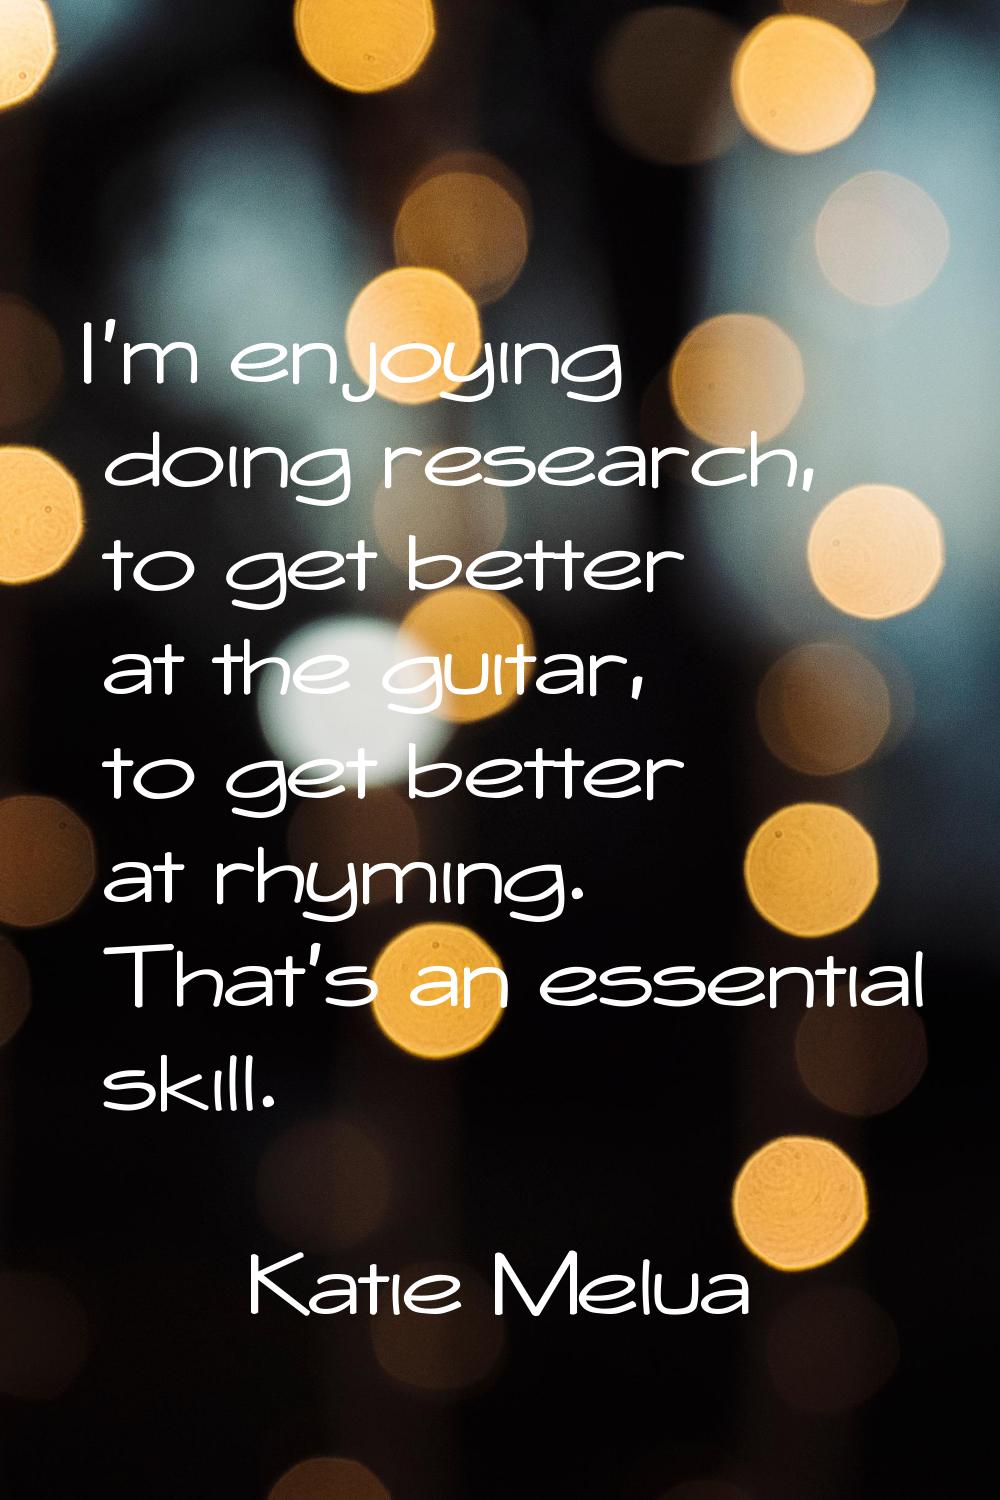 I'm enjoying doing research, to get better at the guitar, to get better at rhyming. That's an essen